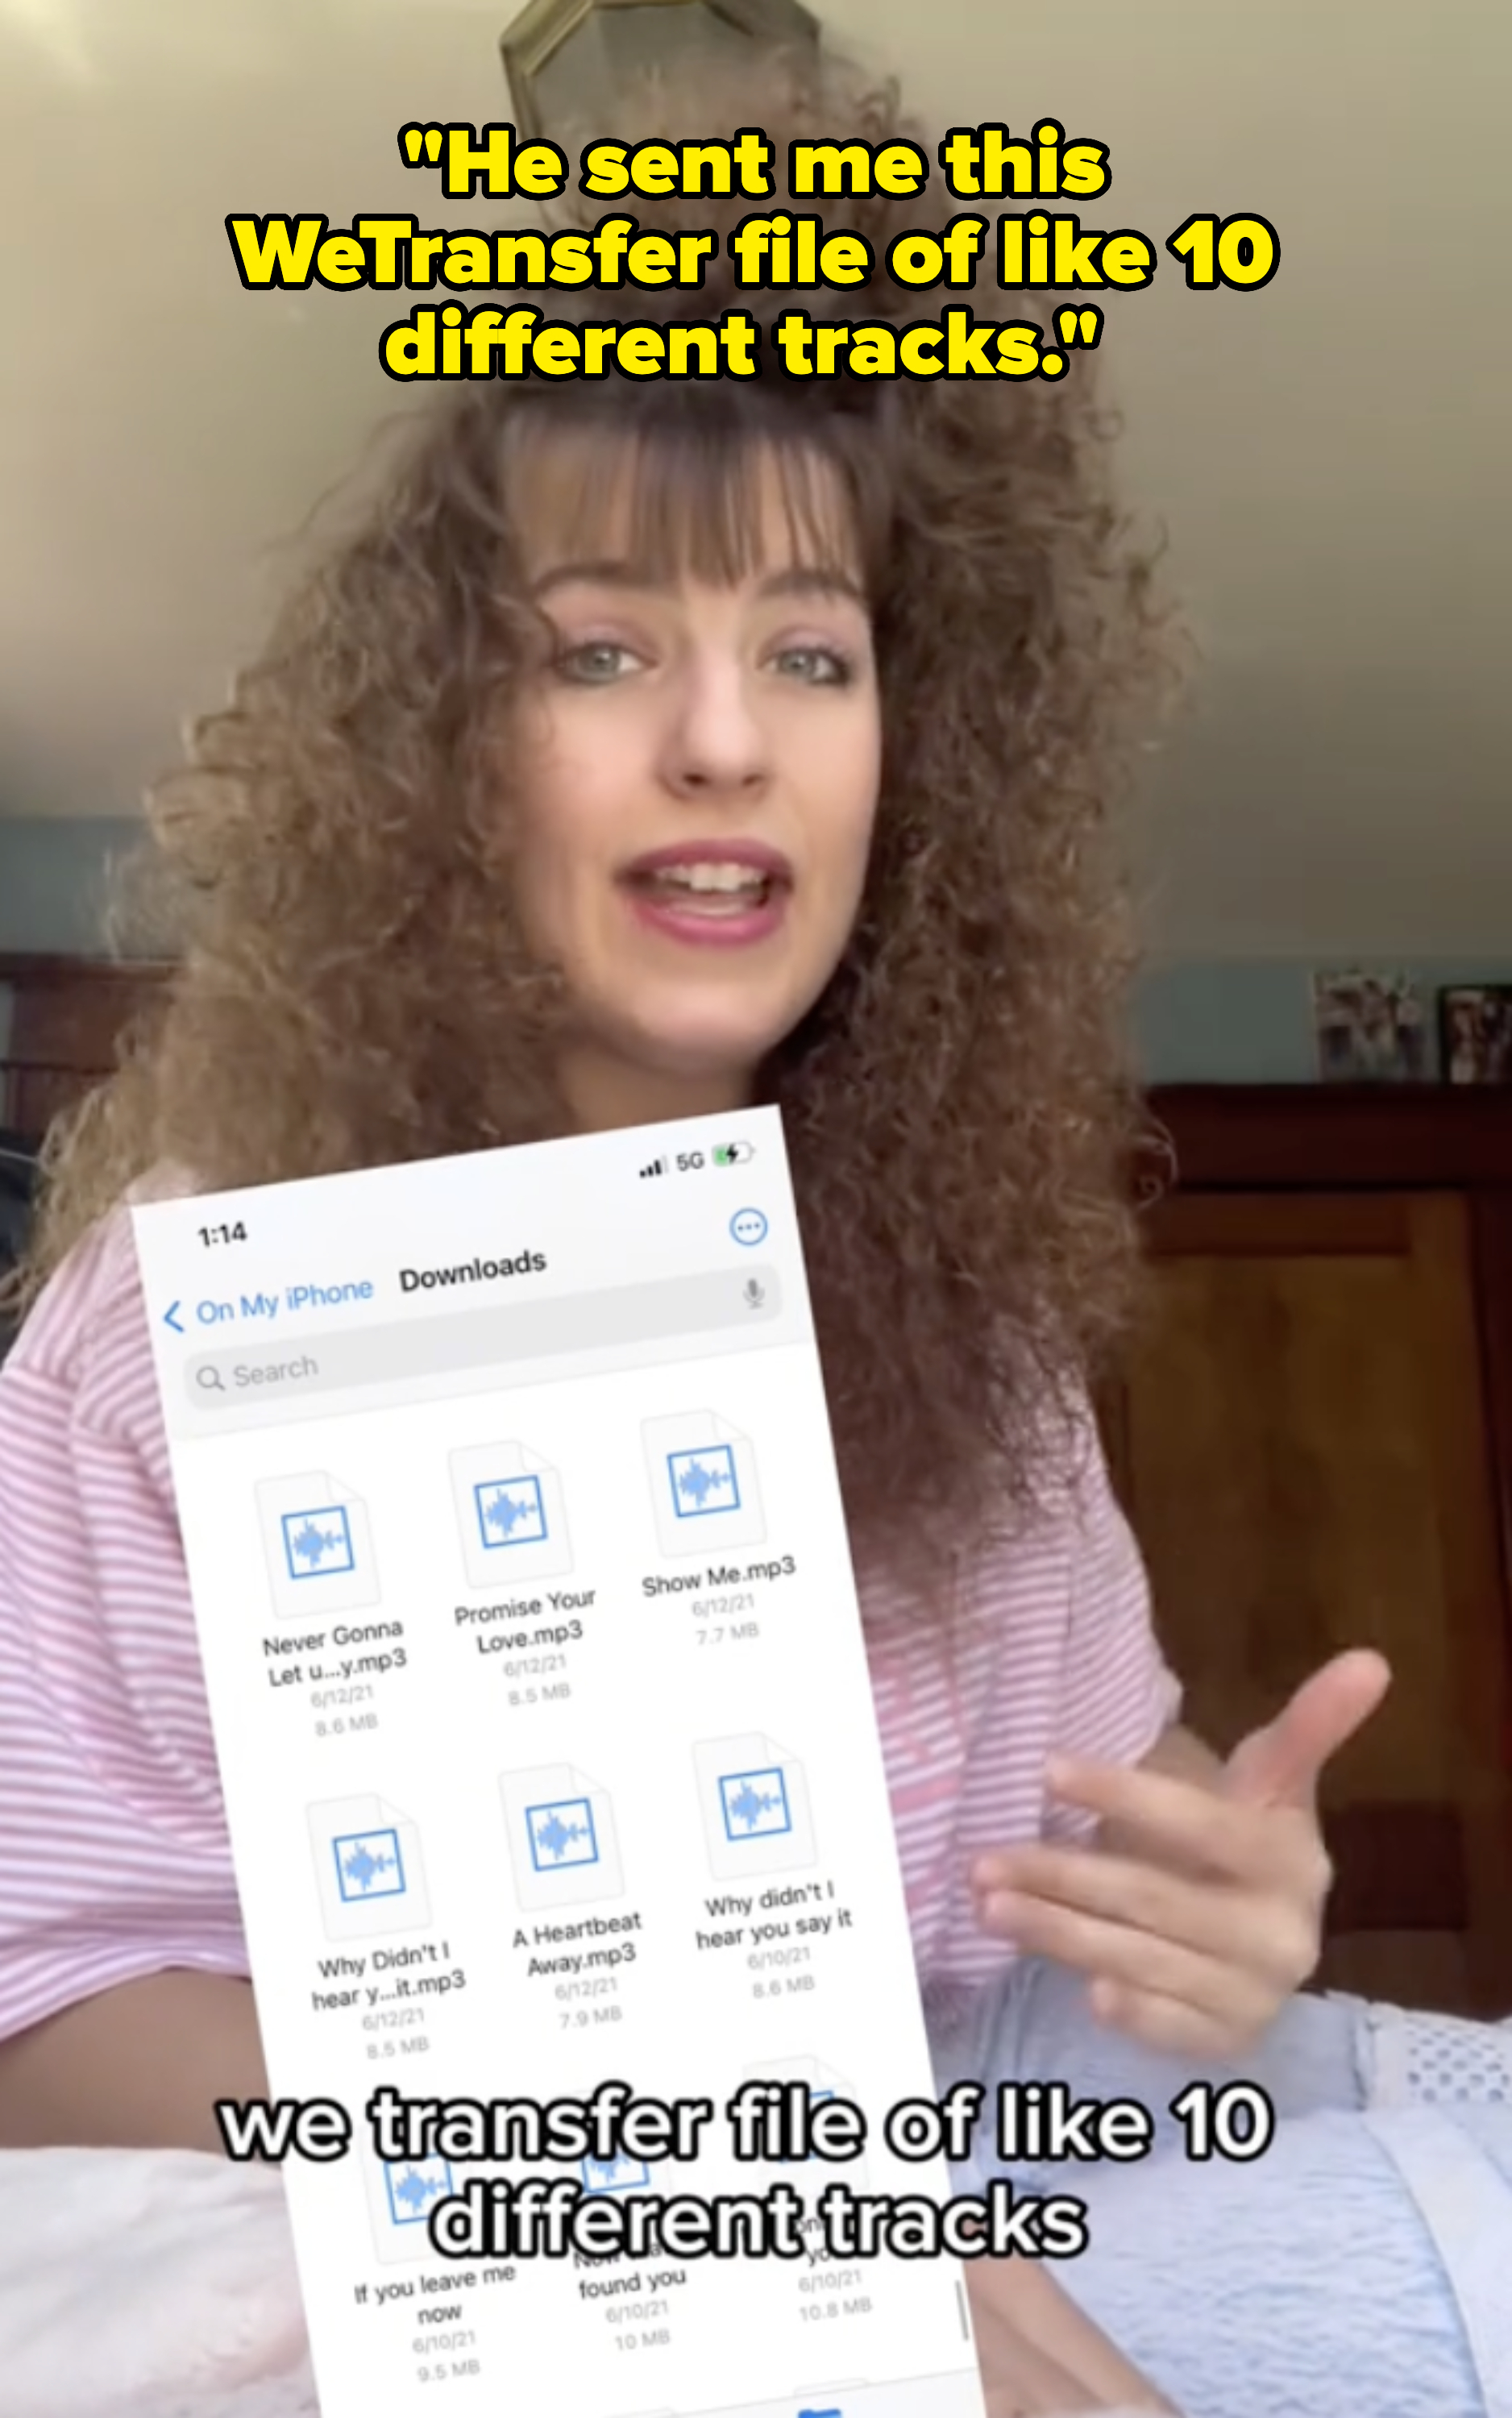 Woman with curly hair discusses transferred audio files on her phone, showing a list of downloaded MP3 tracks, including &quot;Never Gonna Let U.mp3&quot; and &quot;Promise You&quot;